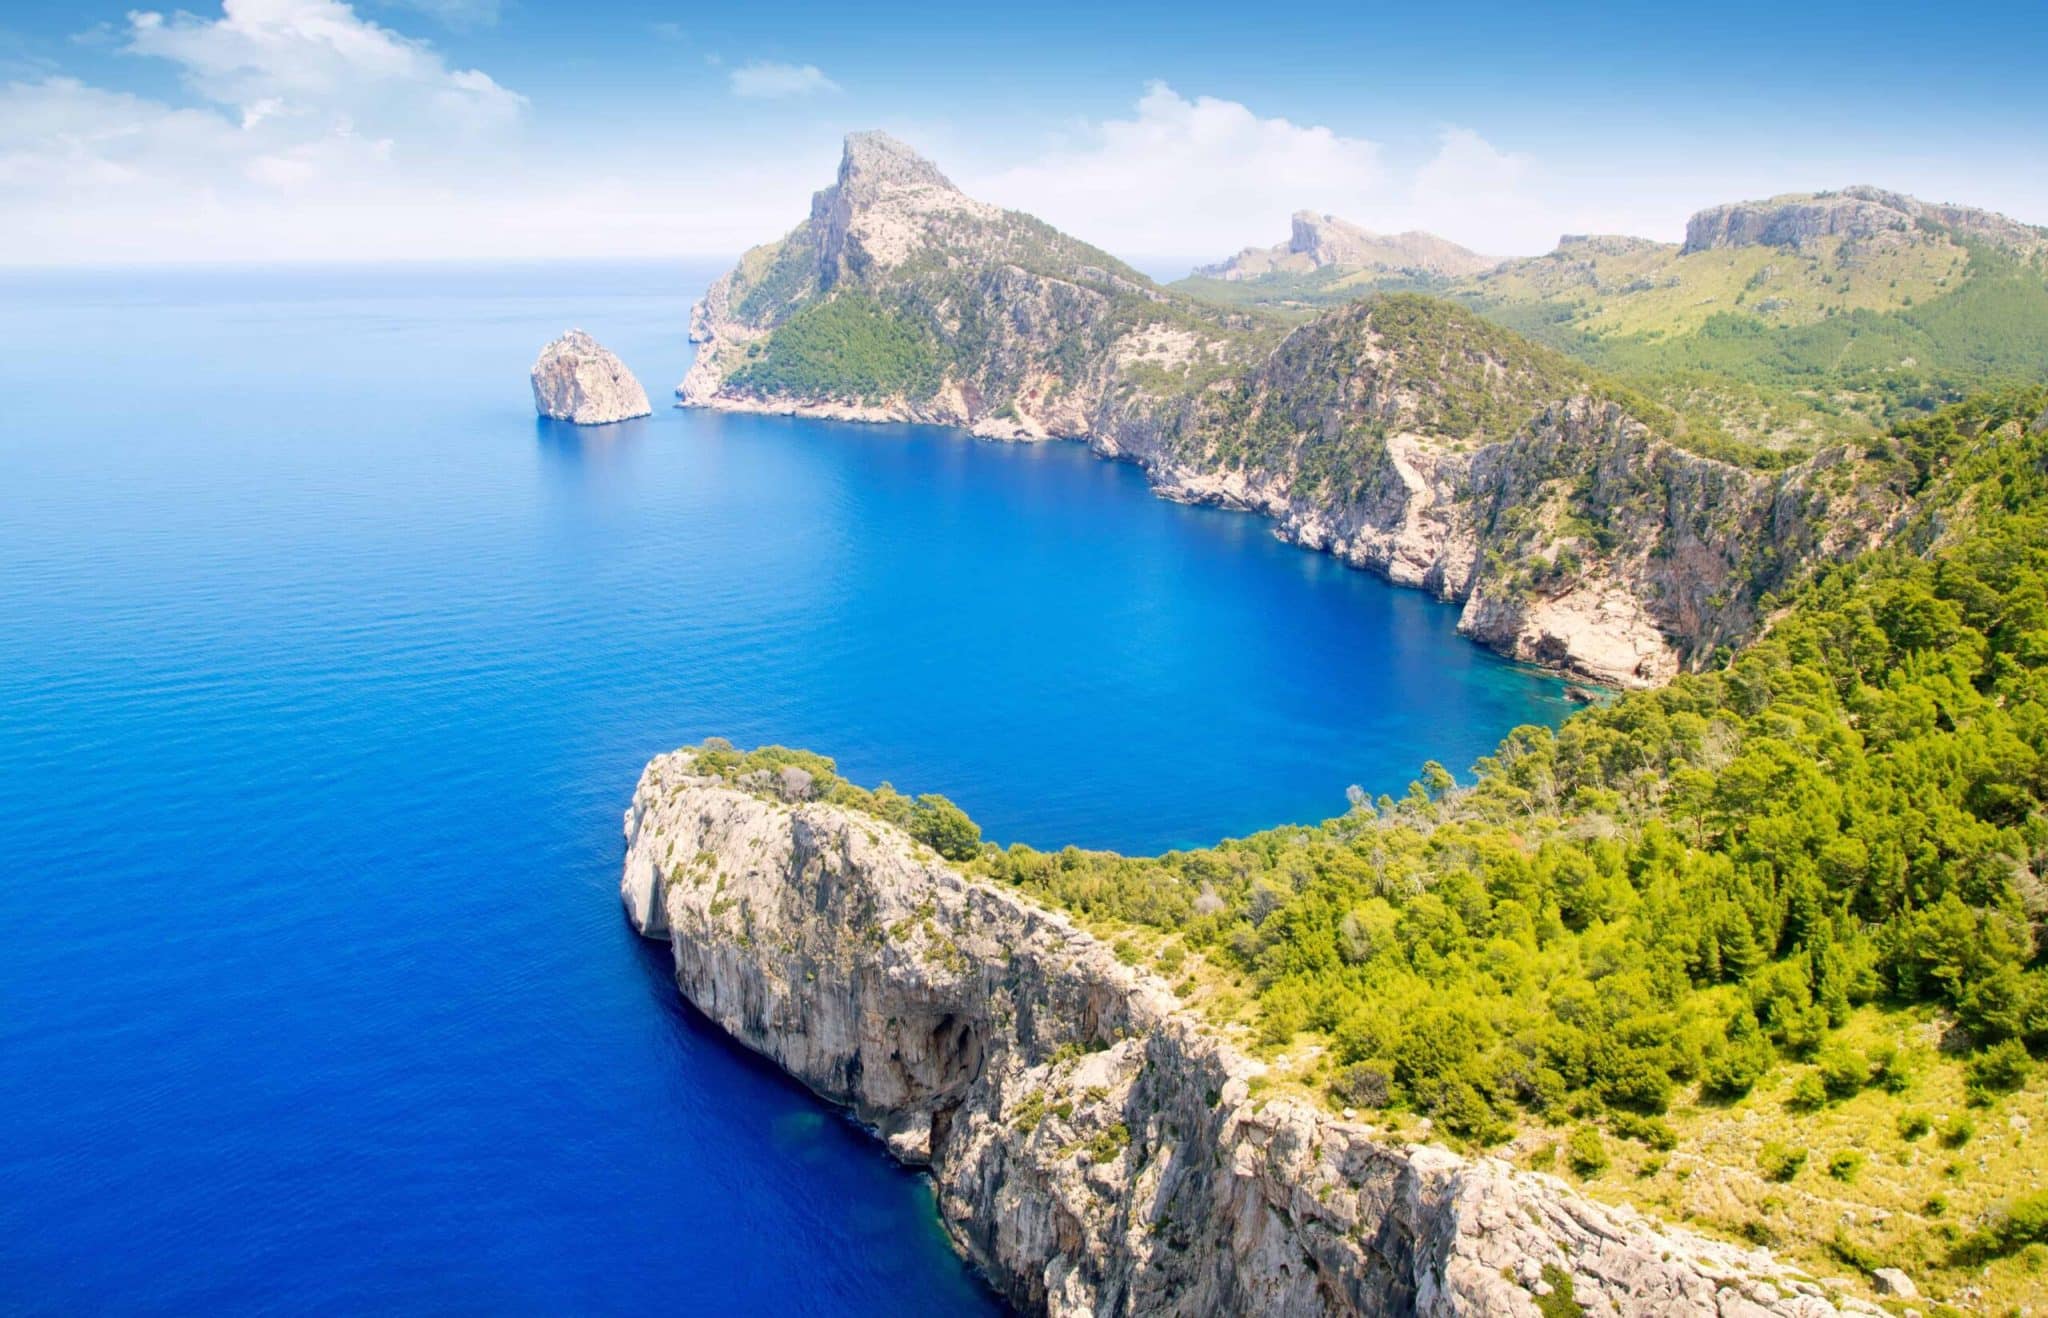 Step into Spain's island beats and uncover why splashing cash on homes in the Balearic and Canary Islands could be your next smart move. Let’s explore these sunny isles and see how they stack up as investments.